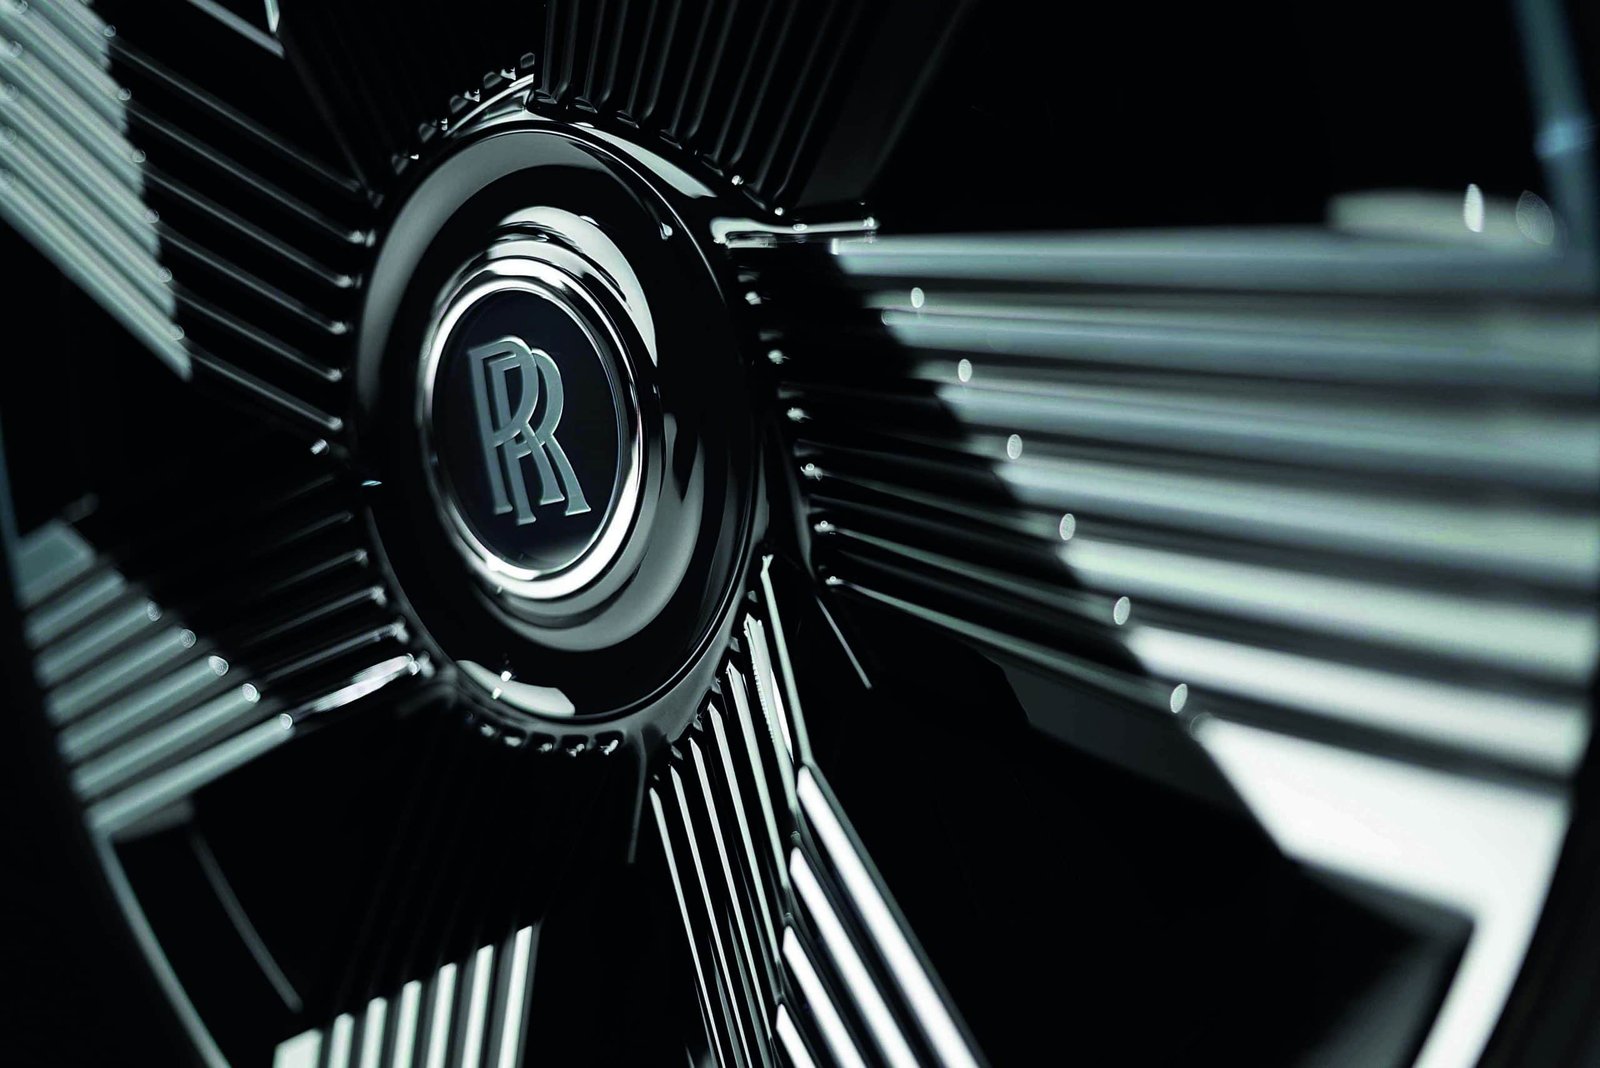 A close up of the wheel of a Rolls Royce, showcasing its grandeur and exquisite craftsmanship.